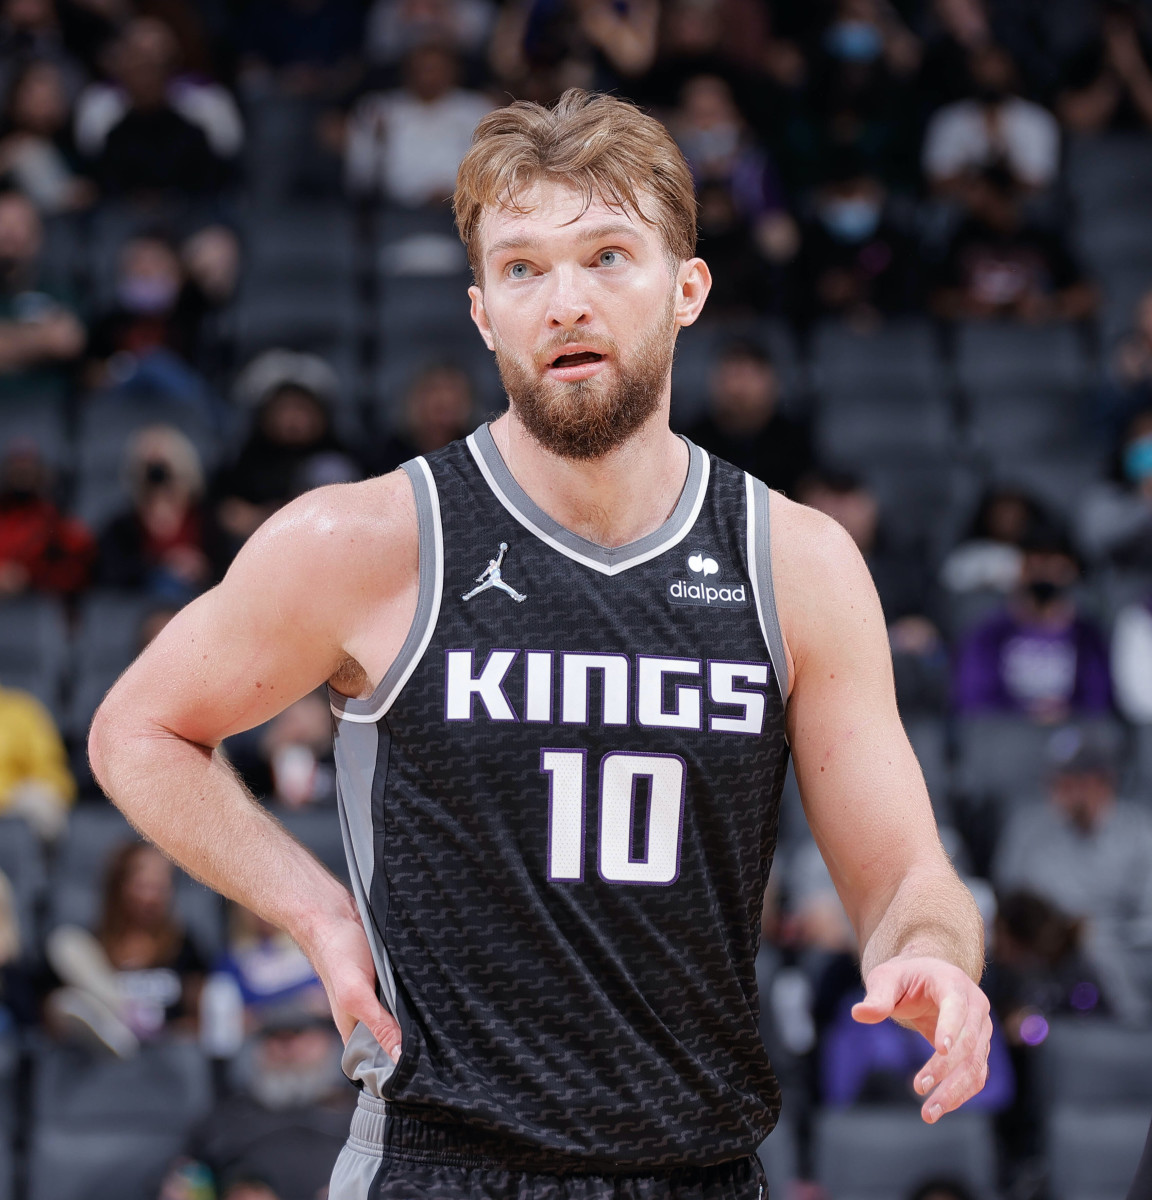 Domantas Sabonis On First Win With The Kings: "I Have Goosebumps, The Welcome Here Is Crazy... We're Going To Come Here And Fight For This Team And Fight For This Franchise."